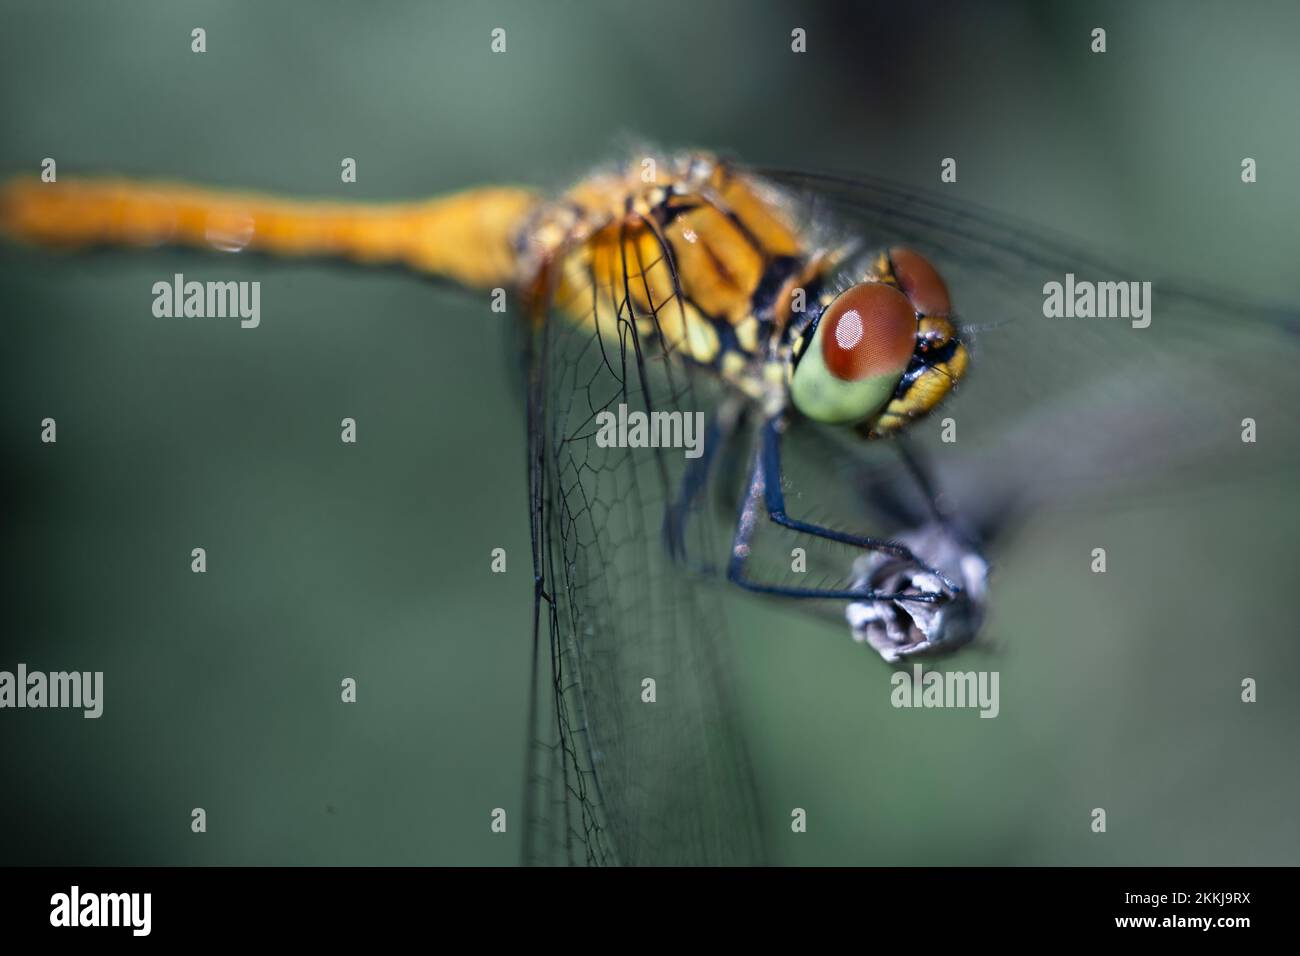 Dragonfly photographed close up. Big eyes of a dragonfly. Dragonfly on a branch of grass. Stock Photo